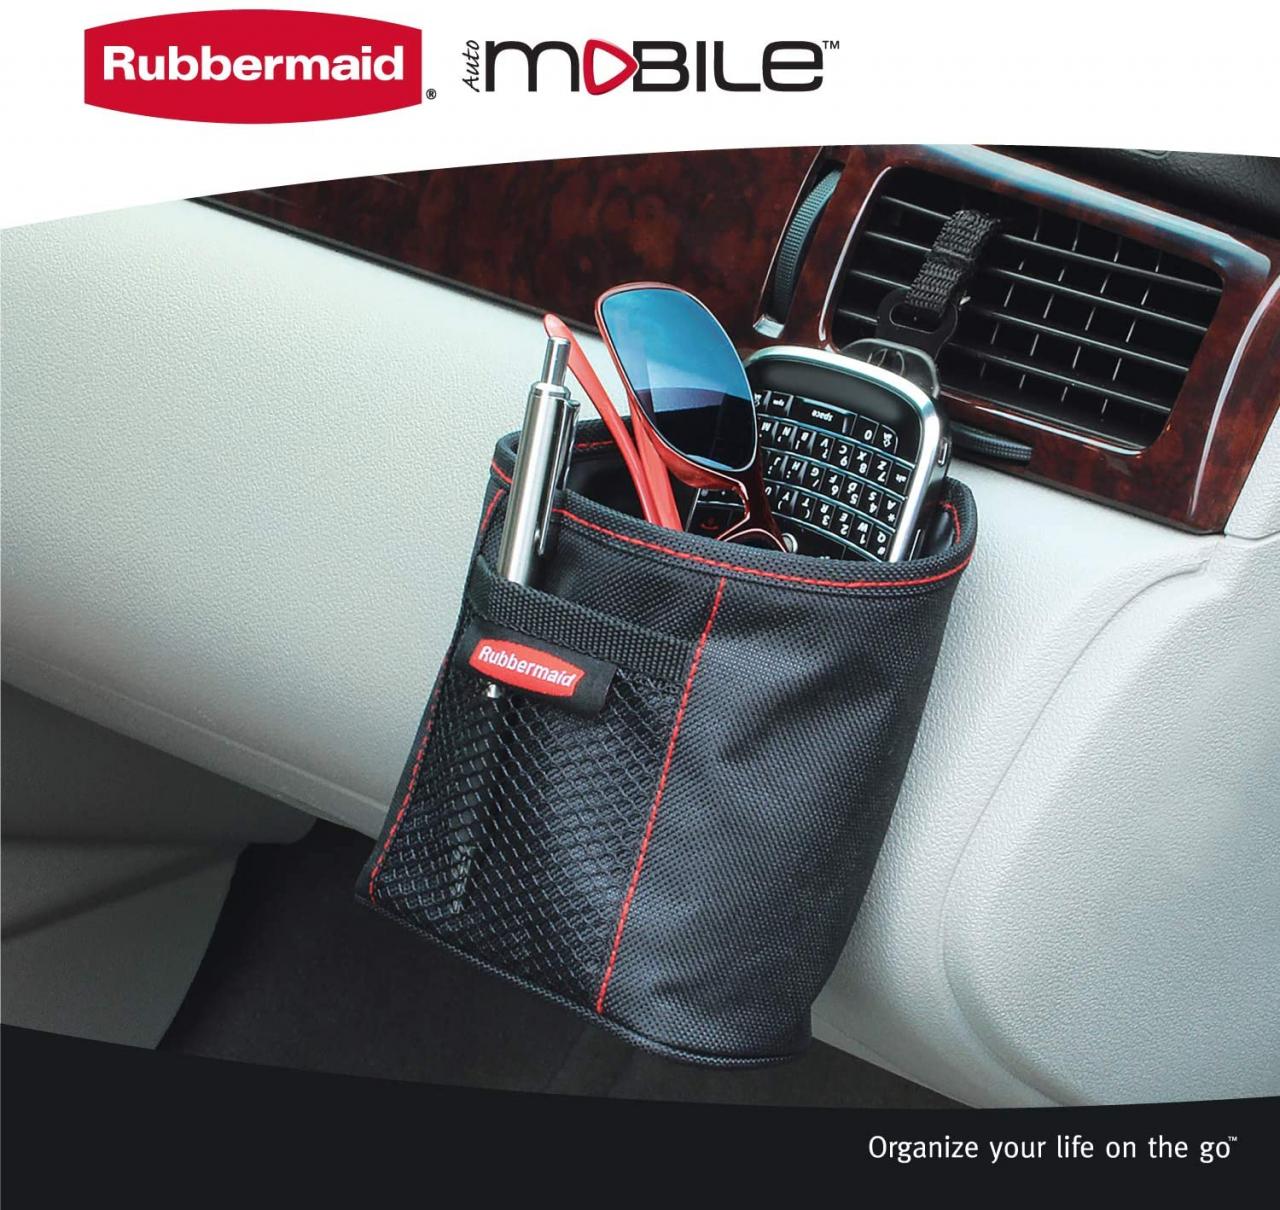 Buy Rubbermaid Automotive Air Vent Catch All Storage Organizer: Cell Phone/ Sunglasses Car Caddy, Soft Sided Online in Italy. B00U1O9KQU